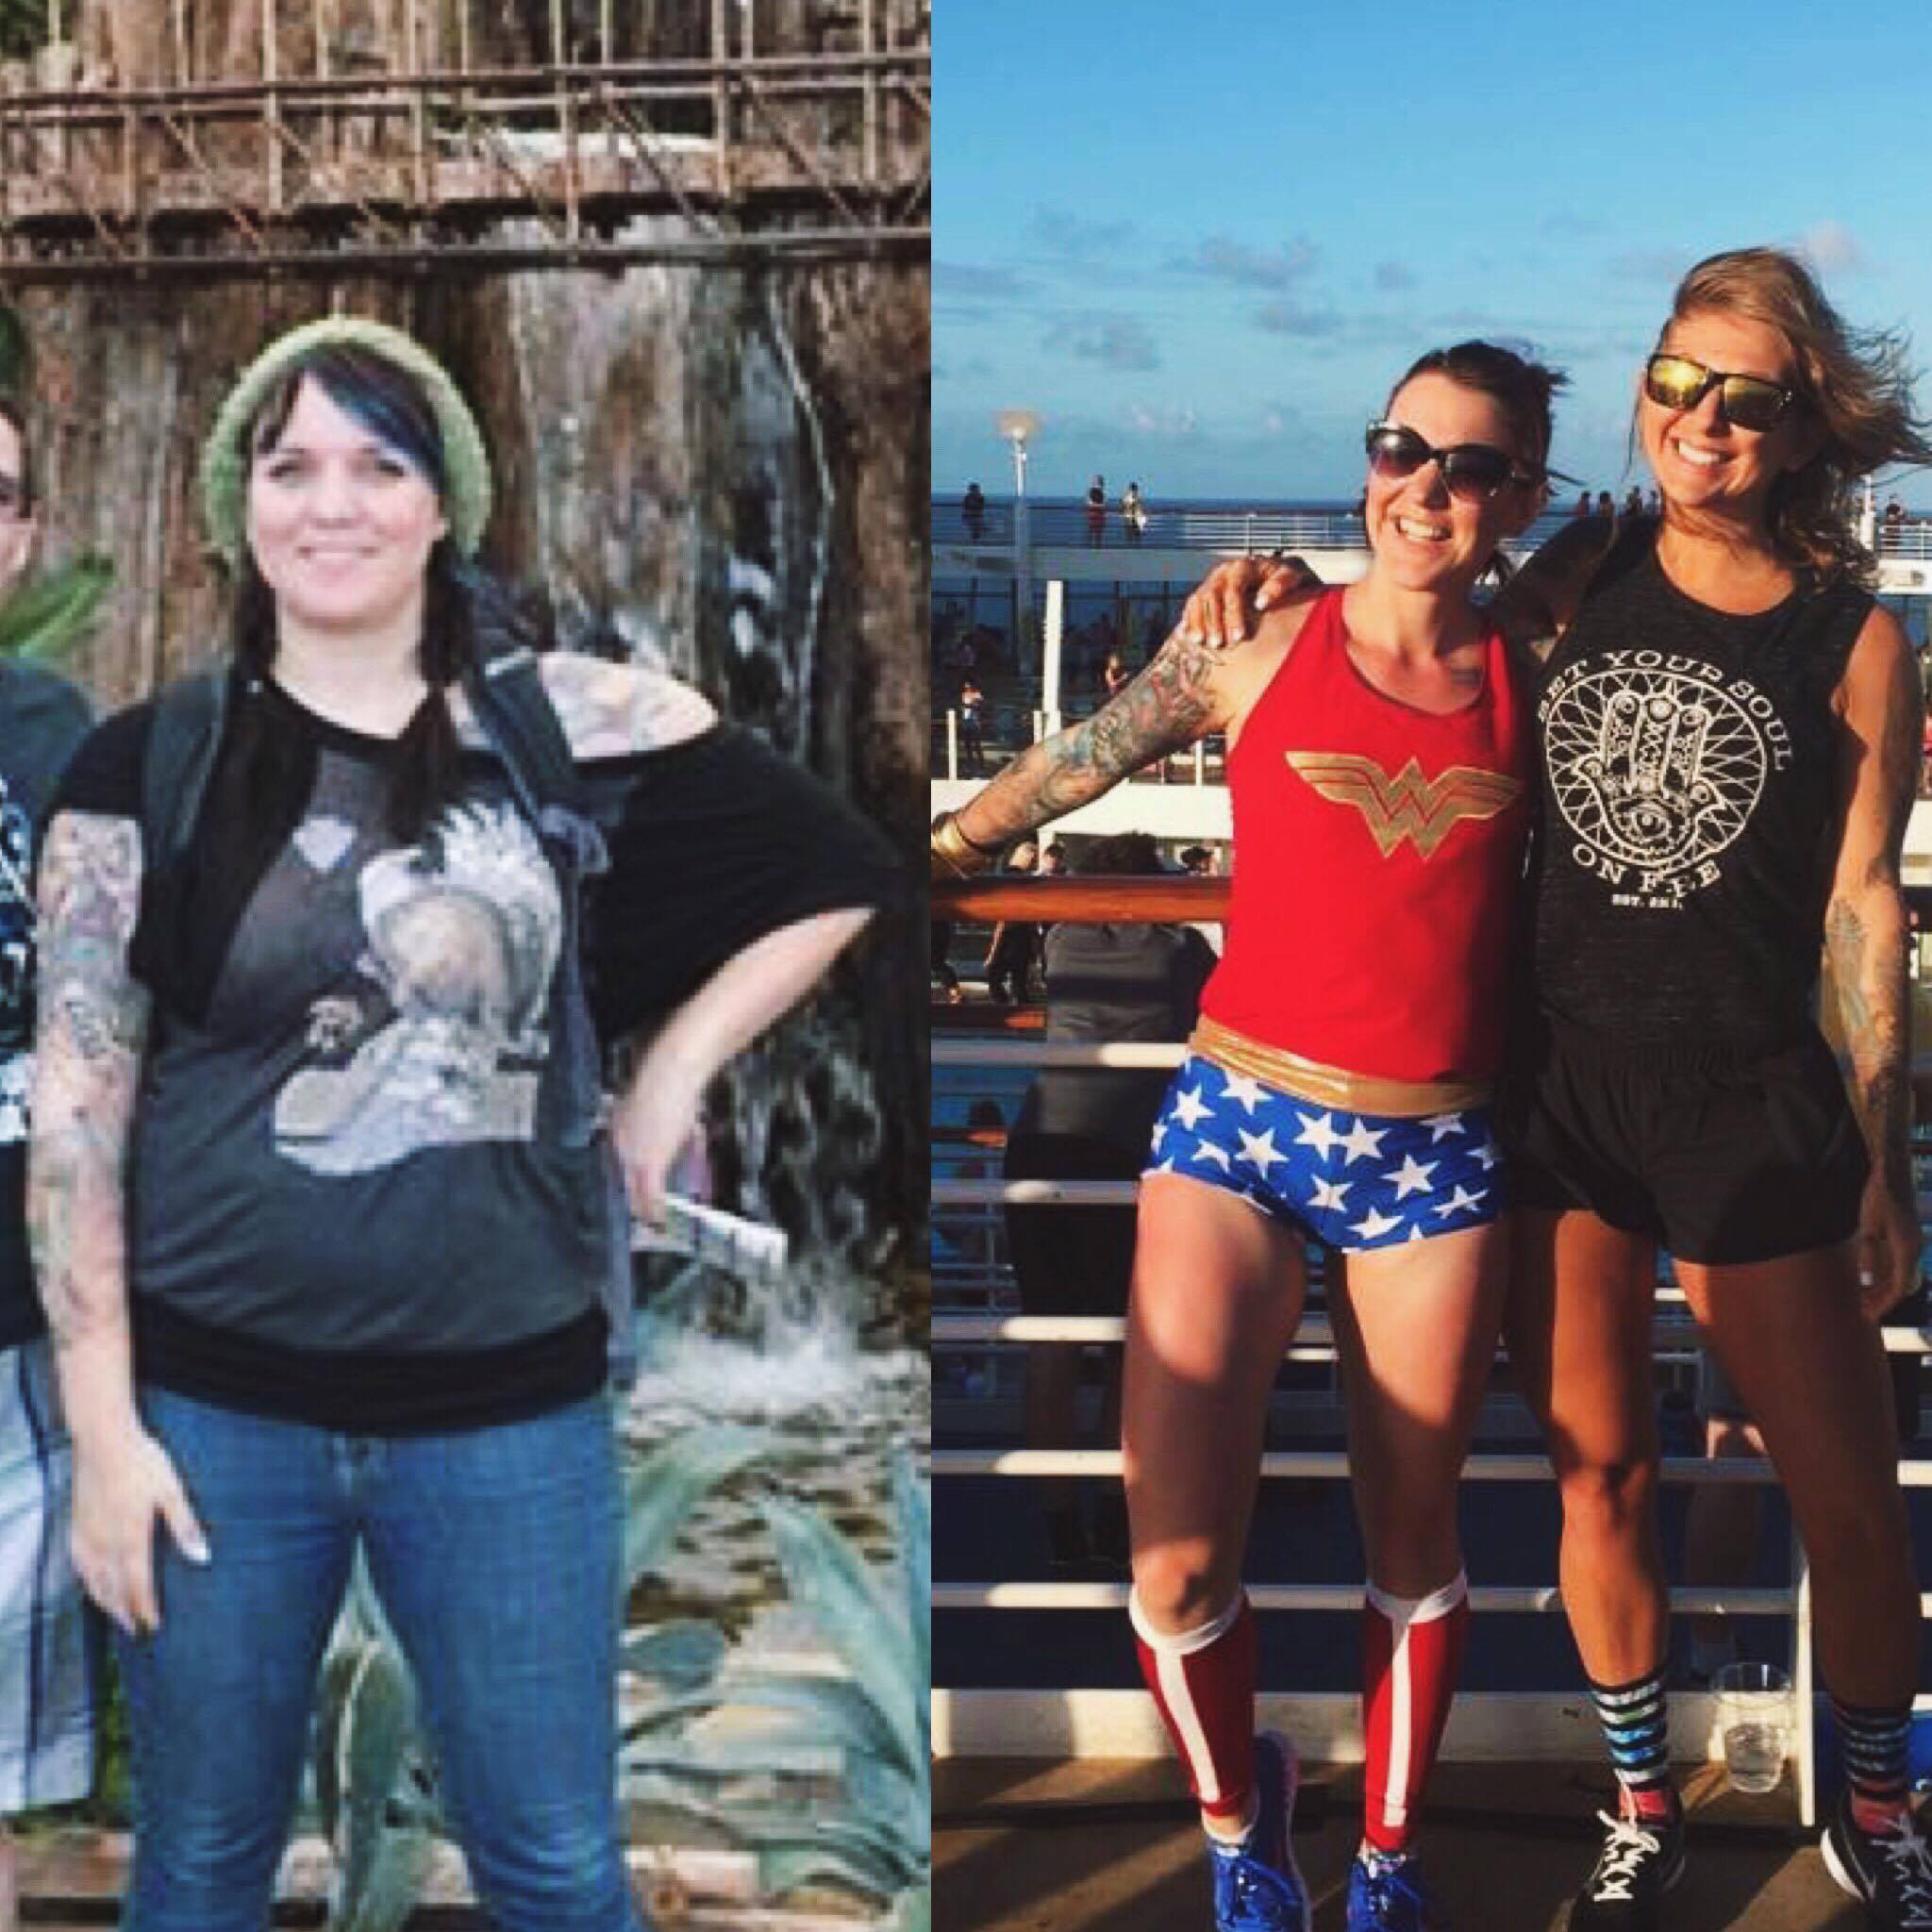 Behind the Scenes into Becoming a Beachbody Coach